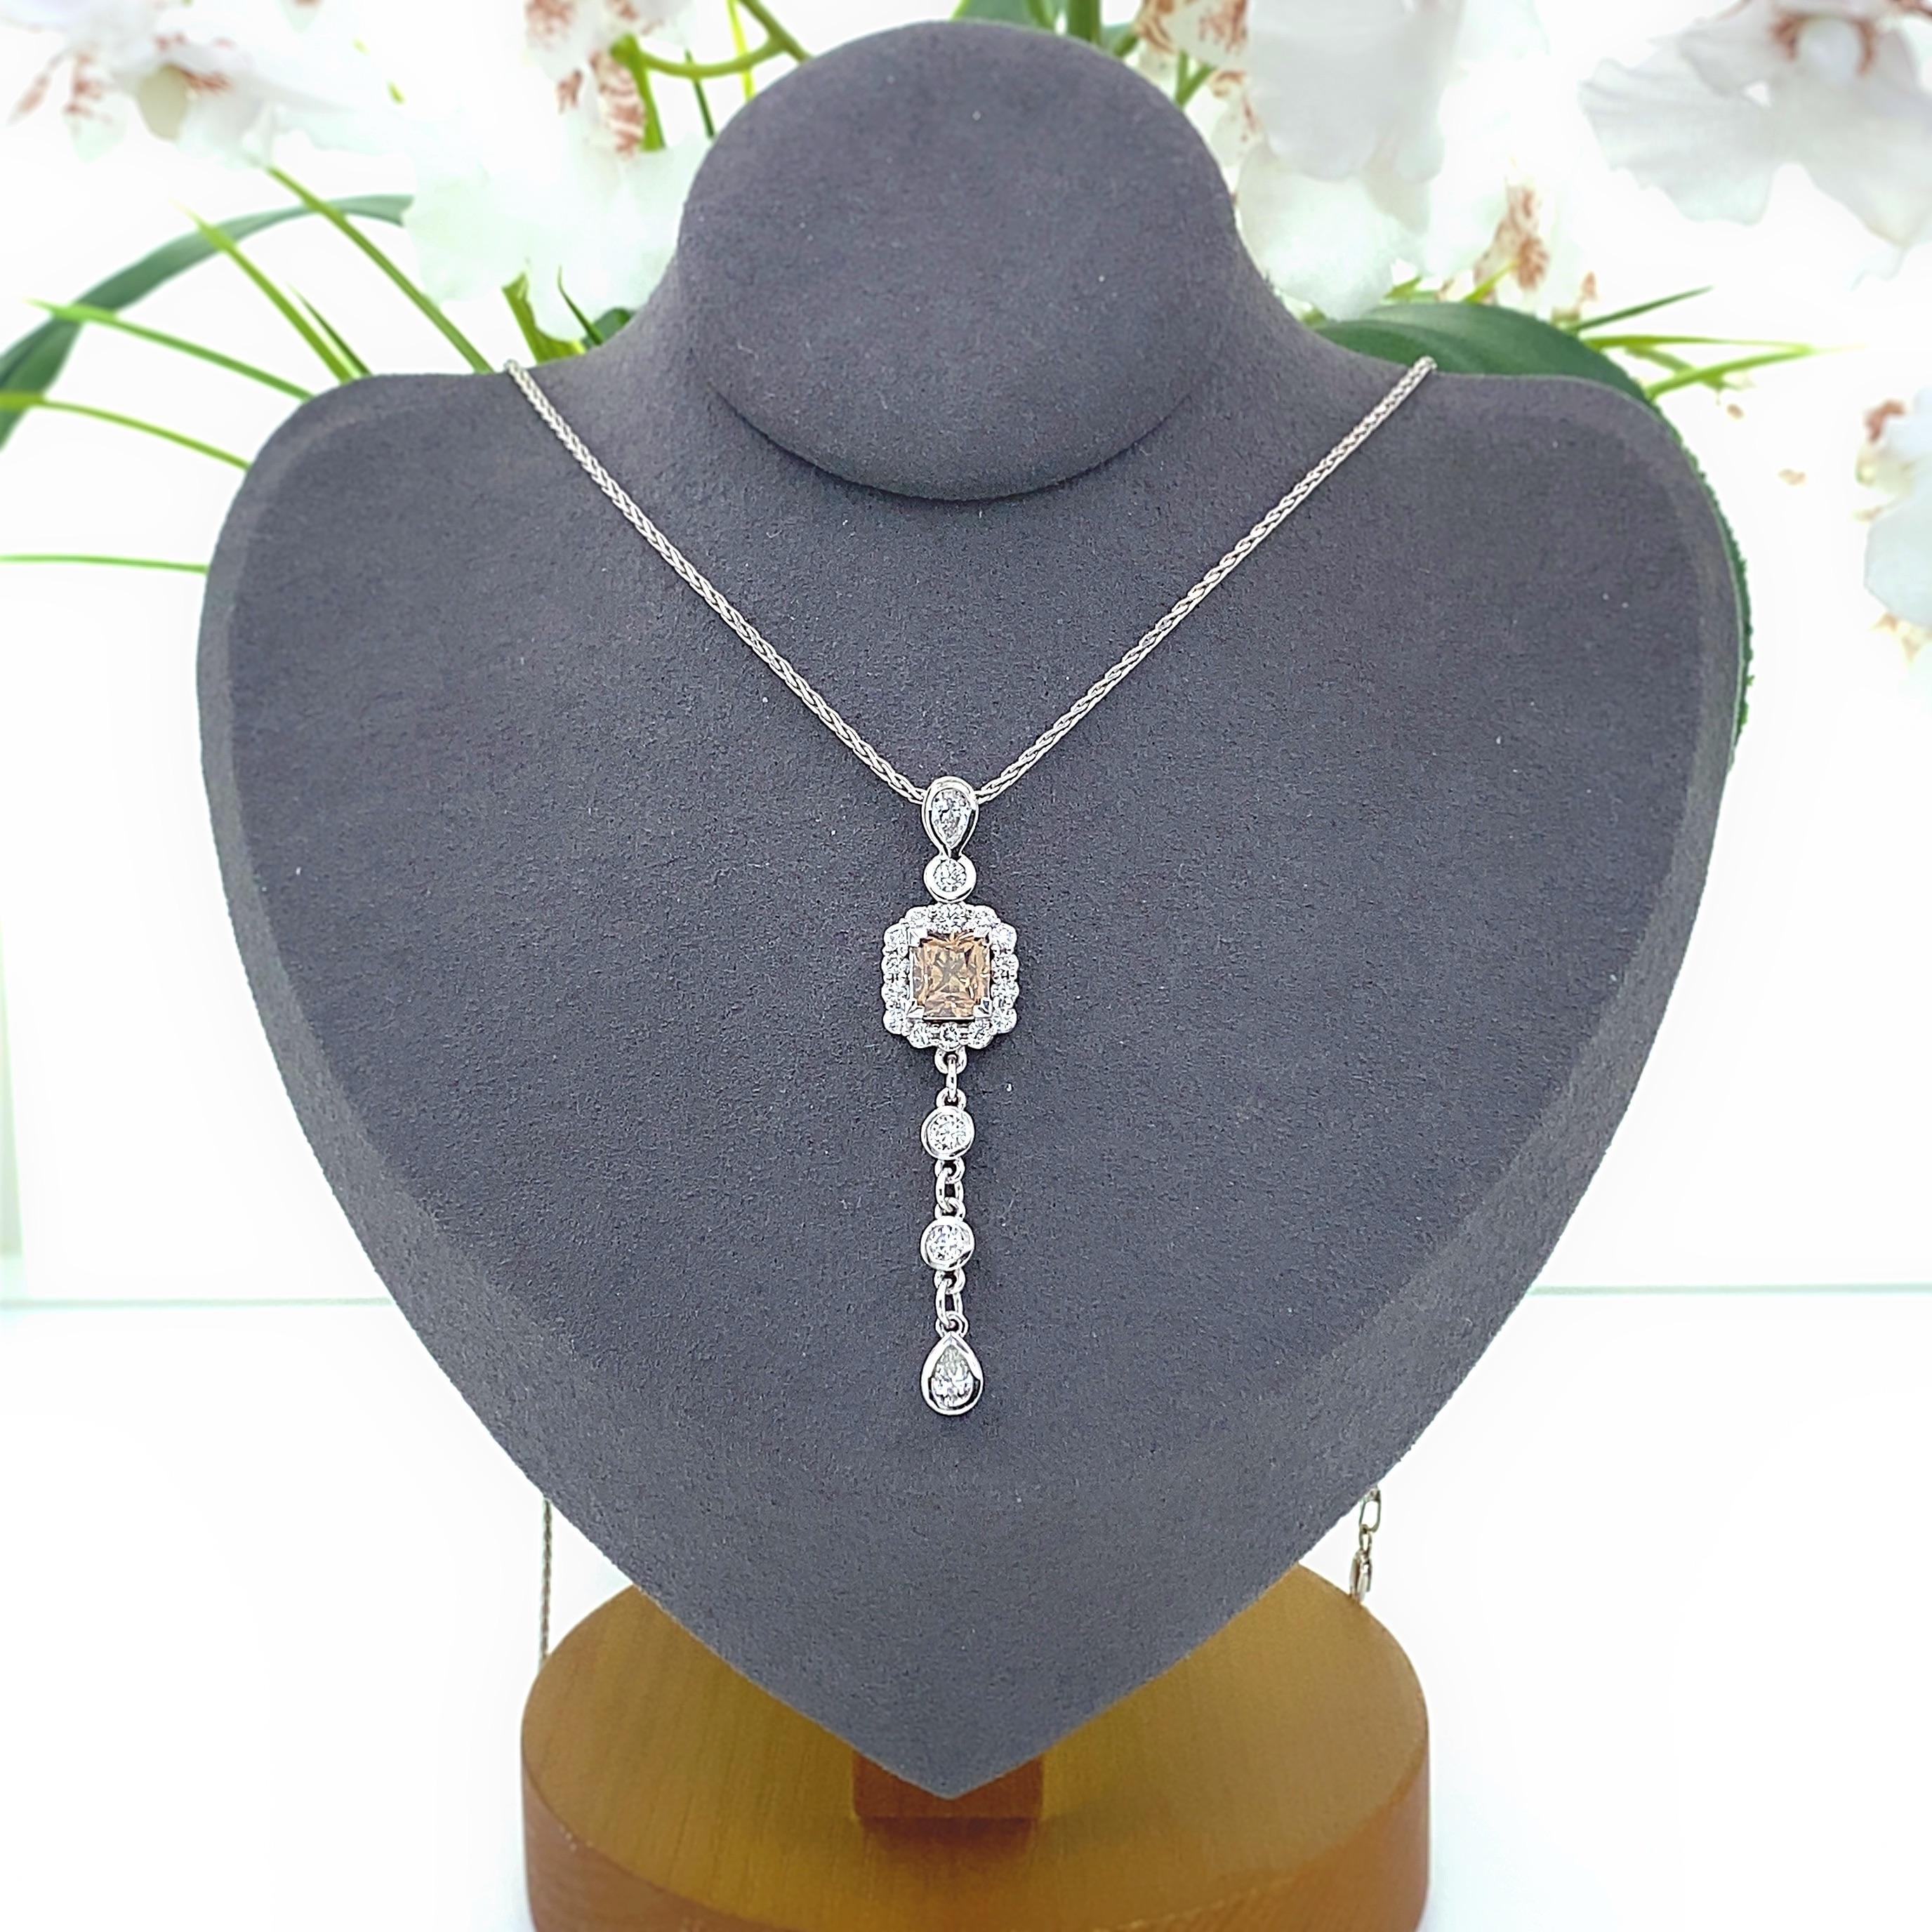 Custom Designed Ladies Diamond Lariat Drop Pendant Necklace
Style:  Lariat 
Certification:  GIA 2195497374
Metal:   14kt White Gold 
Length:  Adjustable Chain 20' inches
Pendant:  2' X 1/2'
TCW:  3.32 tcw
Main Diamond:  Cushion Diamond 2.01